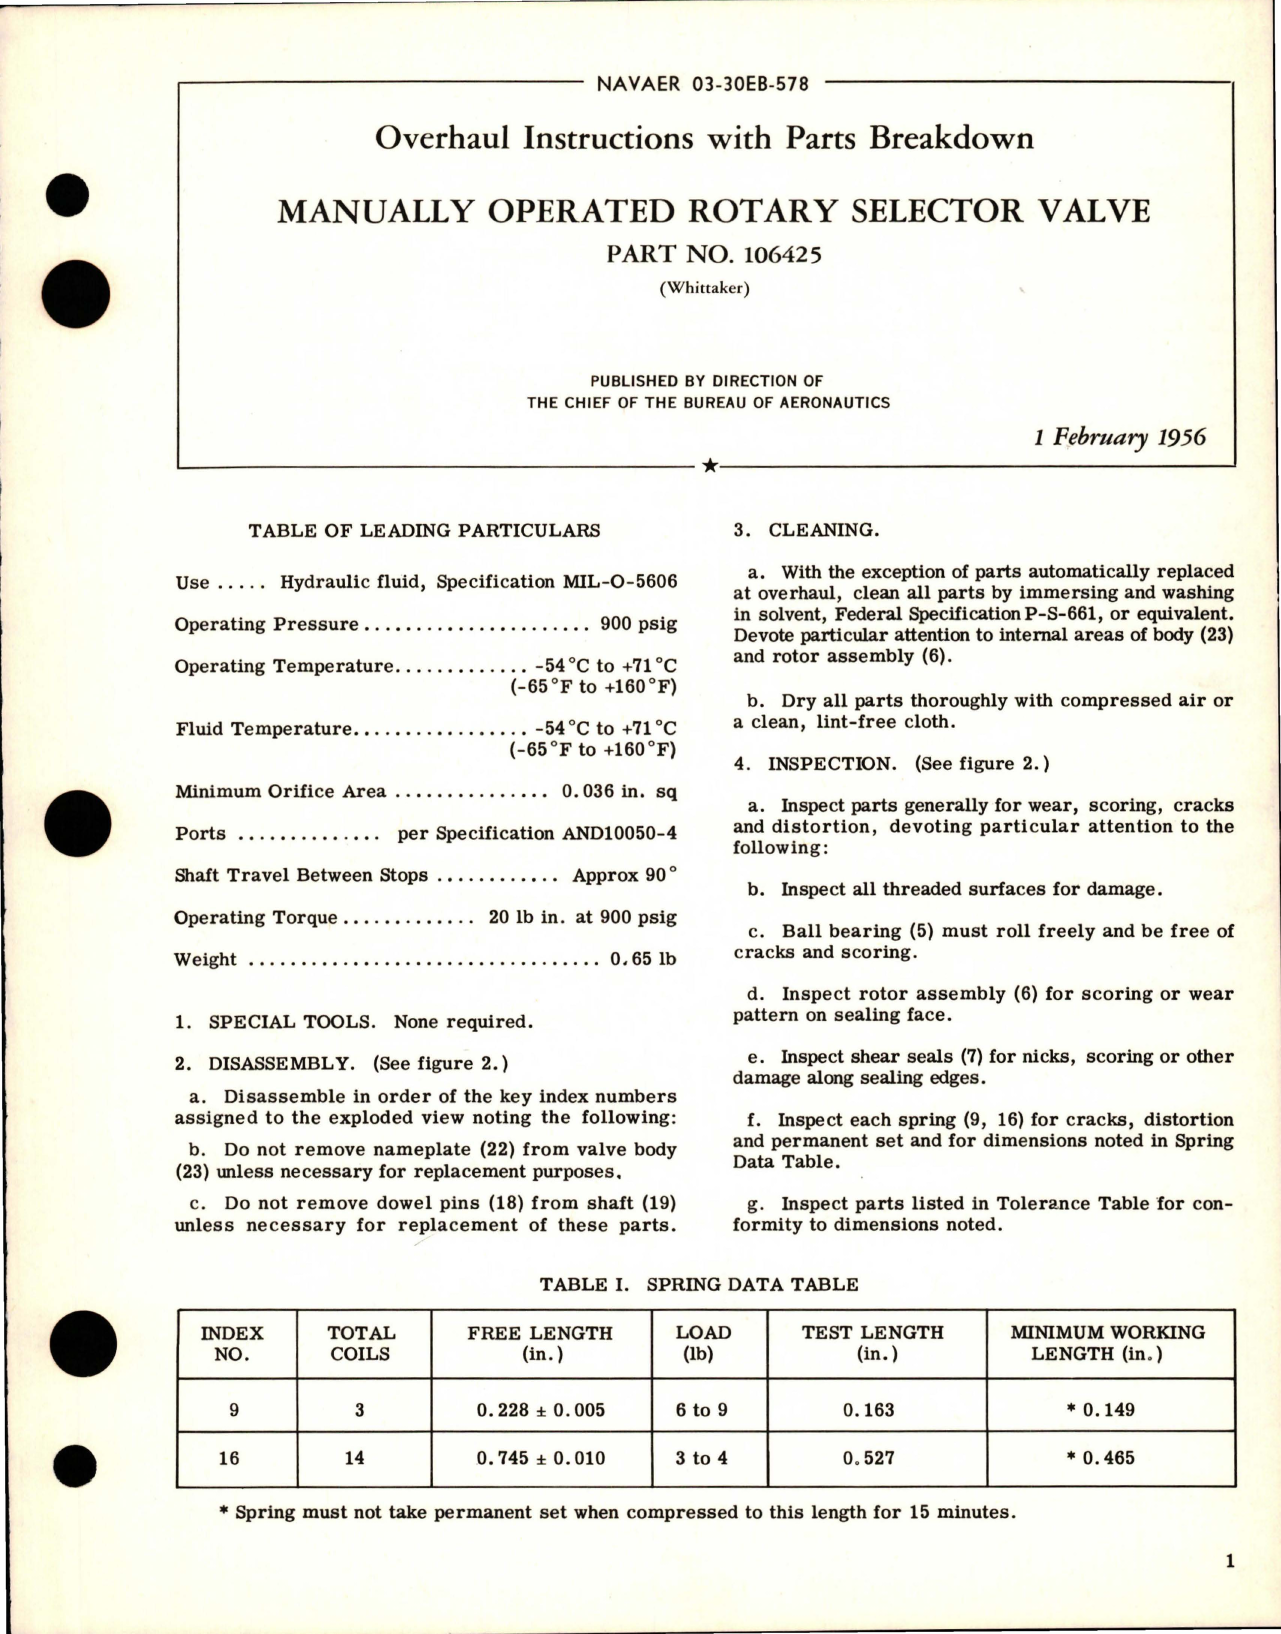 Sample page 1 from AirCorps Library document: Overhaul Instructions with Parts for Manually Operated Rotary Selector Valve - Part 106425